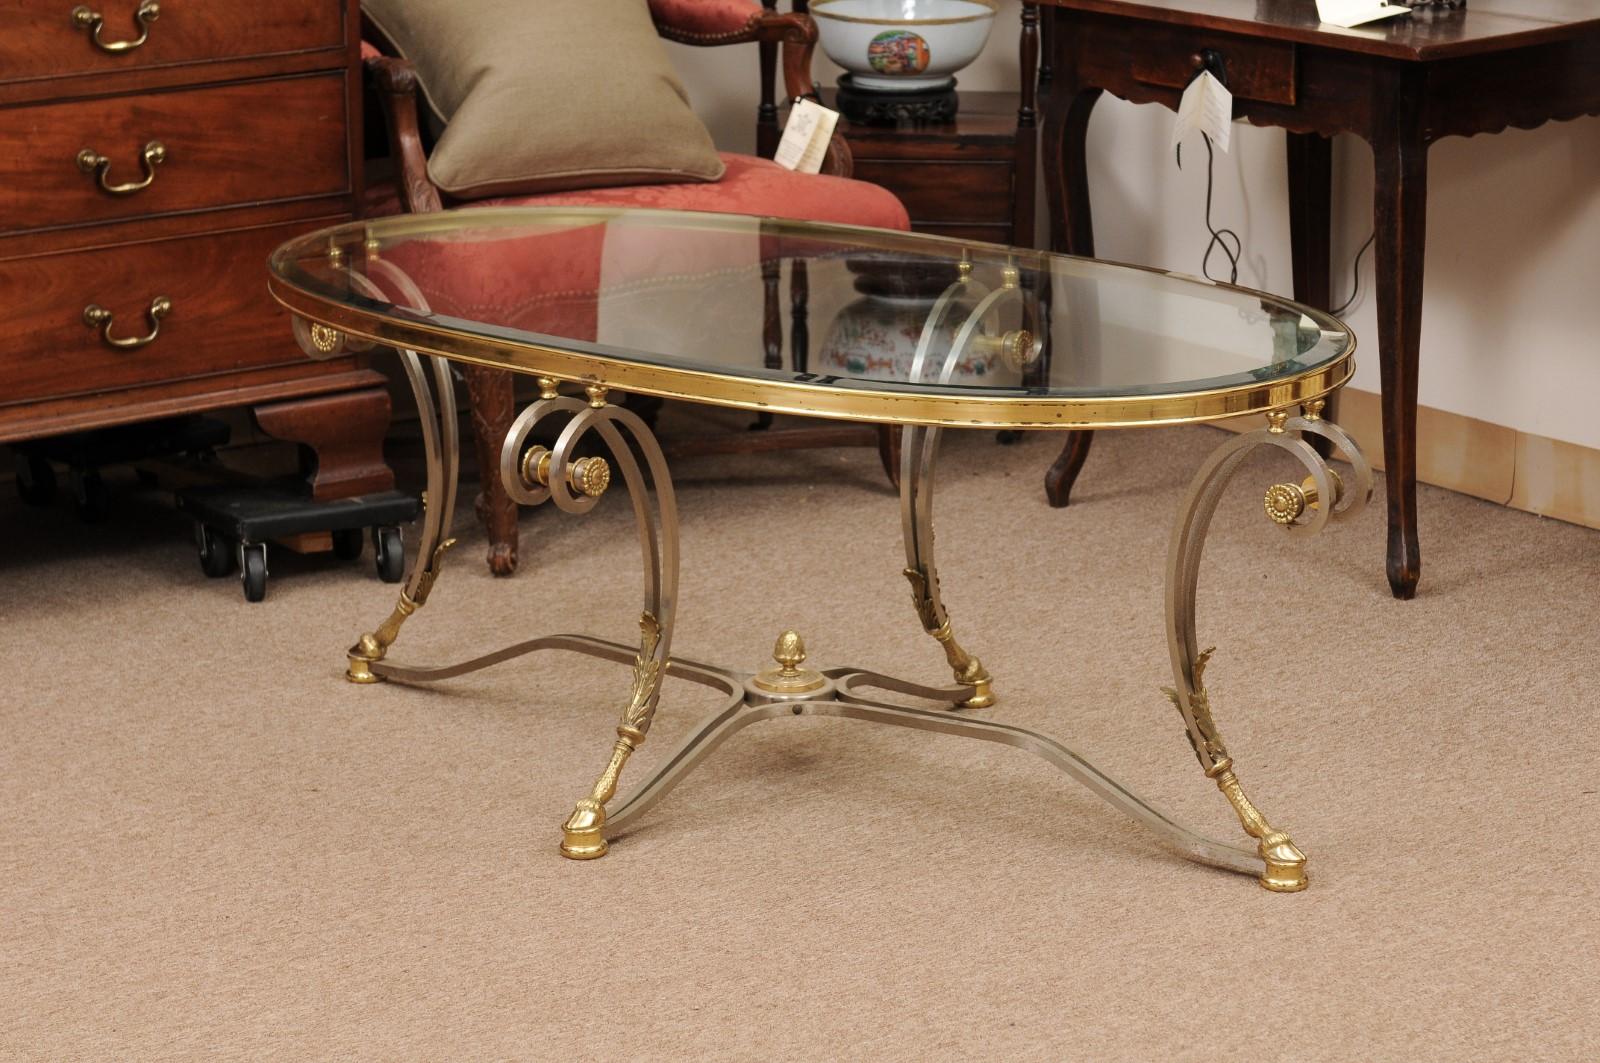 Oval French Steel & Brass Coffee Table with Glass Top, Hoof Feet & Acorn Detail 2